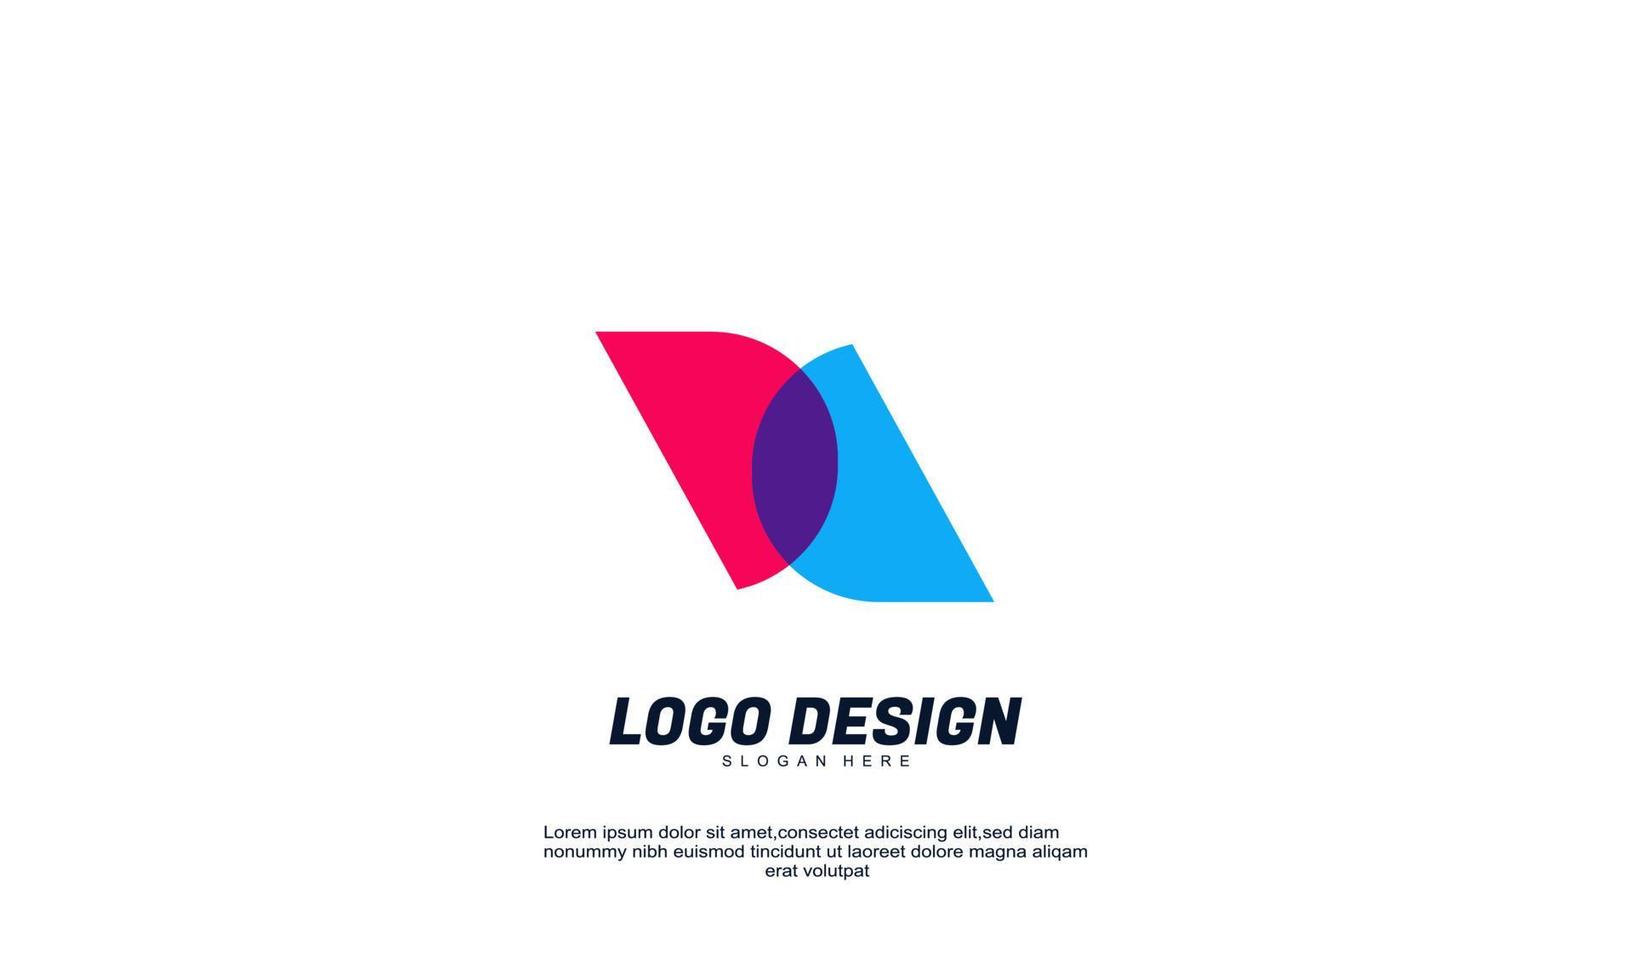 abstract logo for company bussiness brand identity transparent color logo design vector